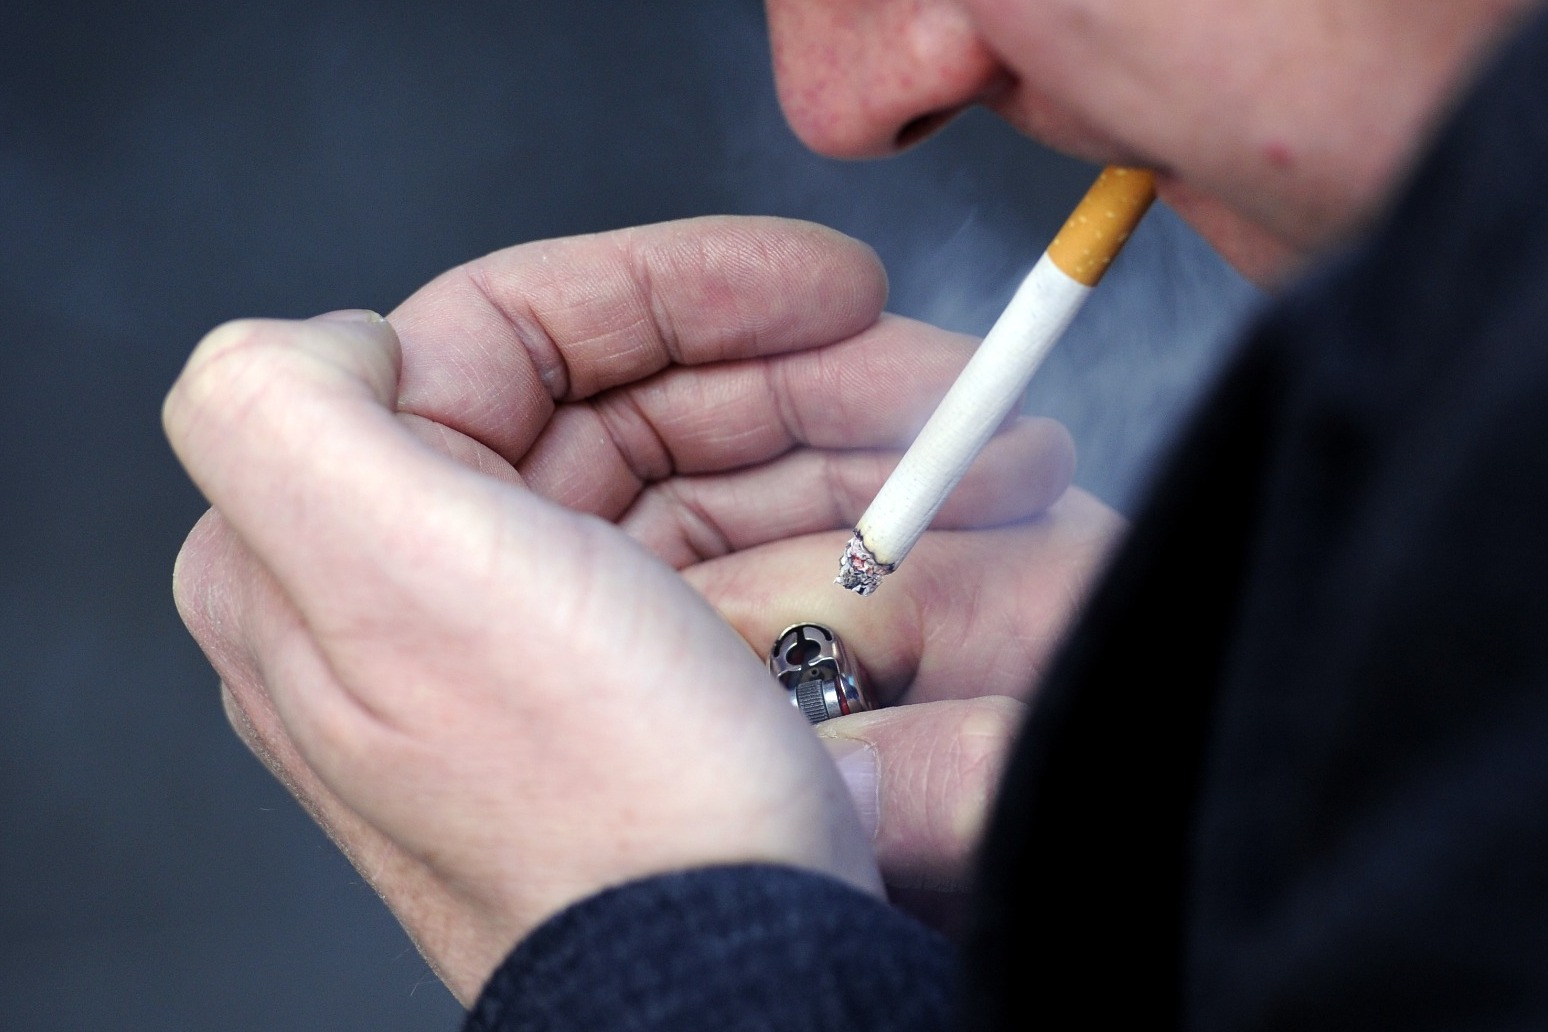 Smokers urged to give up to deter children from habit 